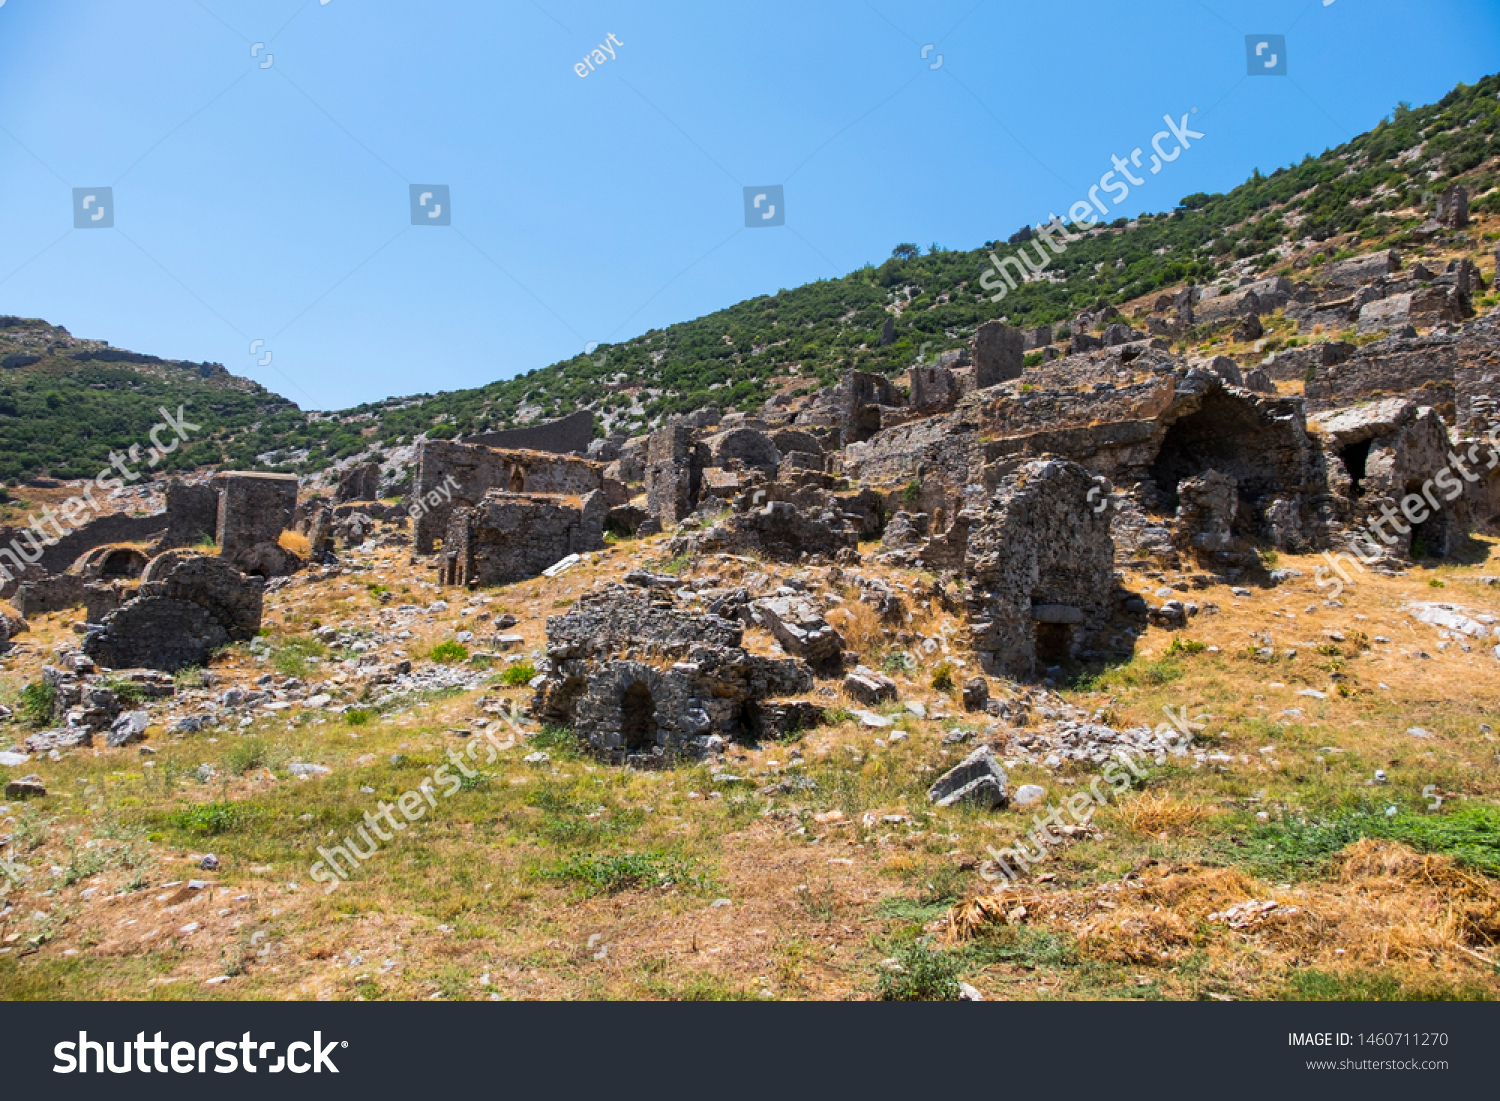 The ancient city of Anemurium is located in Ören, anamur district of Mersin. The ancient city, also known as Old Anamur, is an exquisite place with many historical civilizations and magnificent sea, w #1460711270